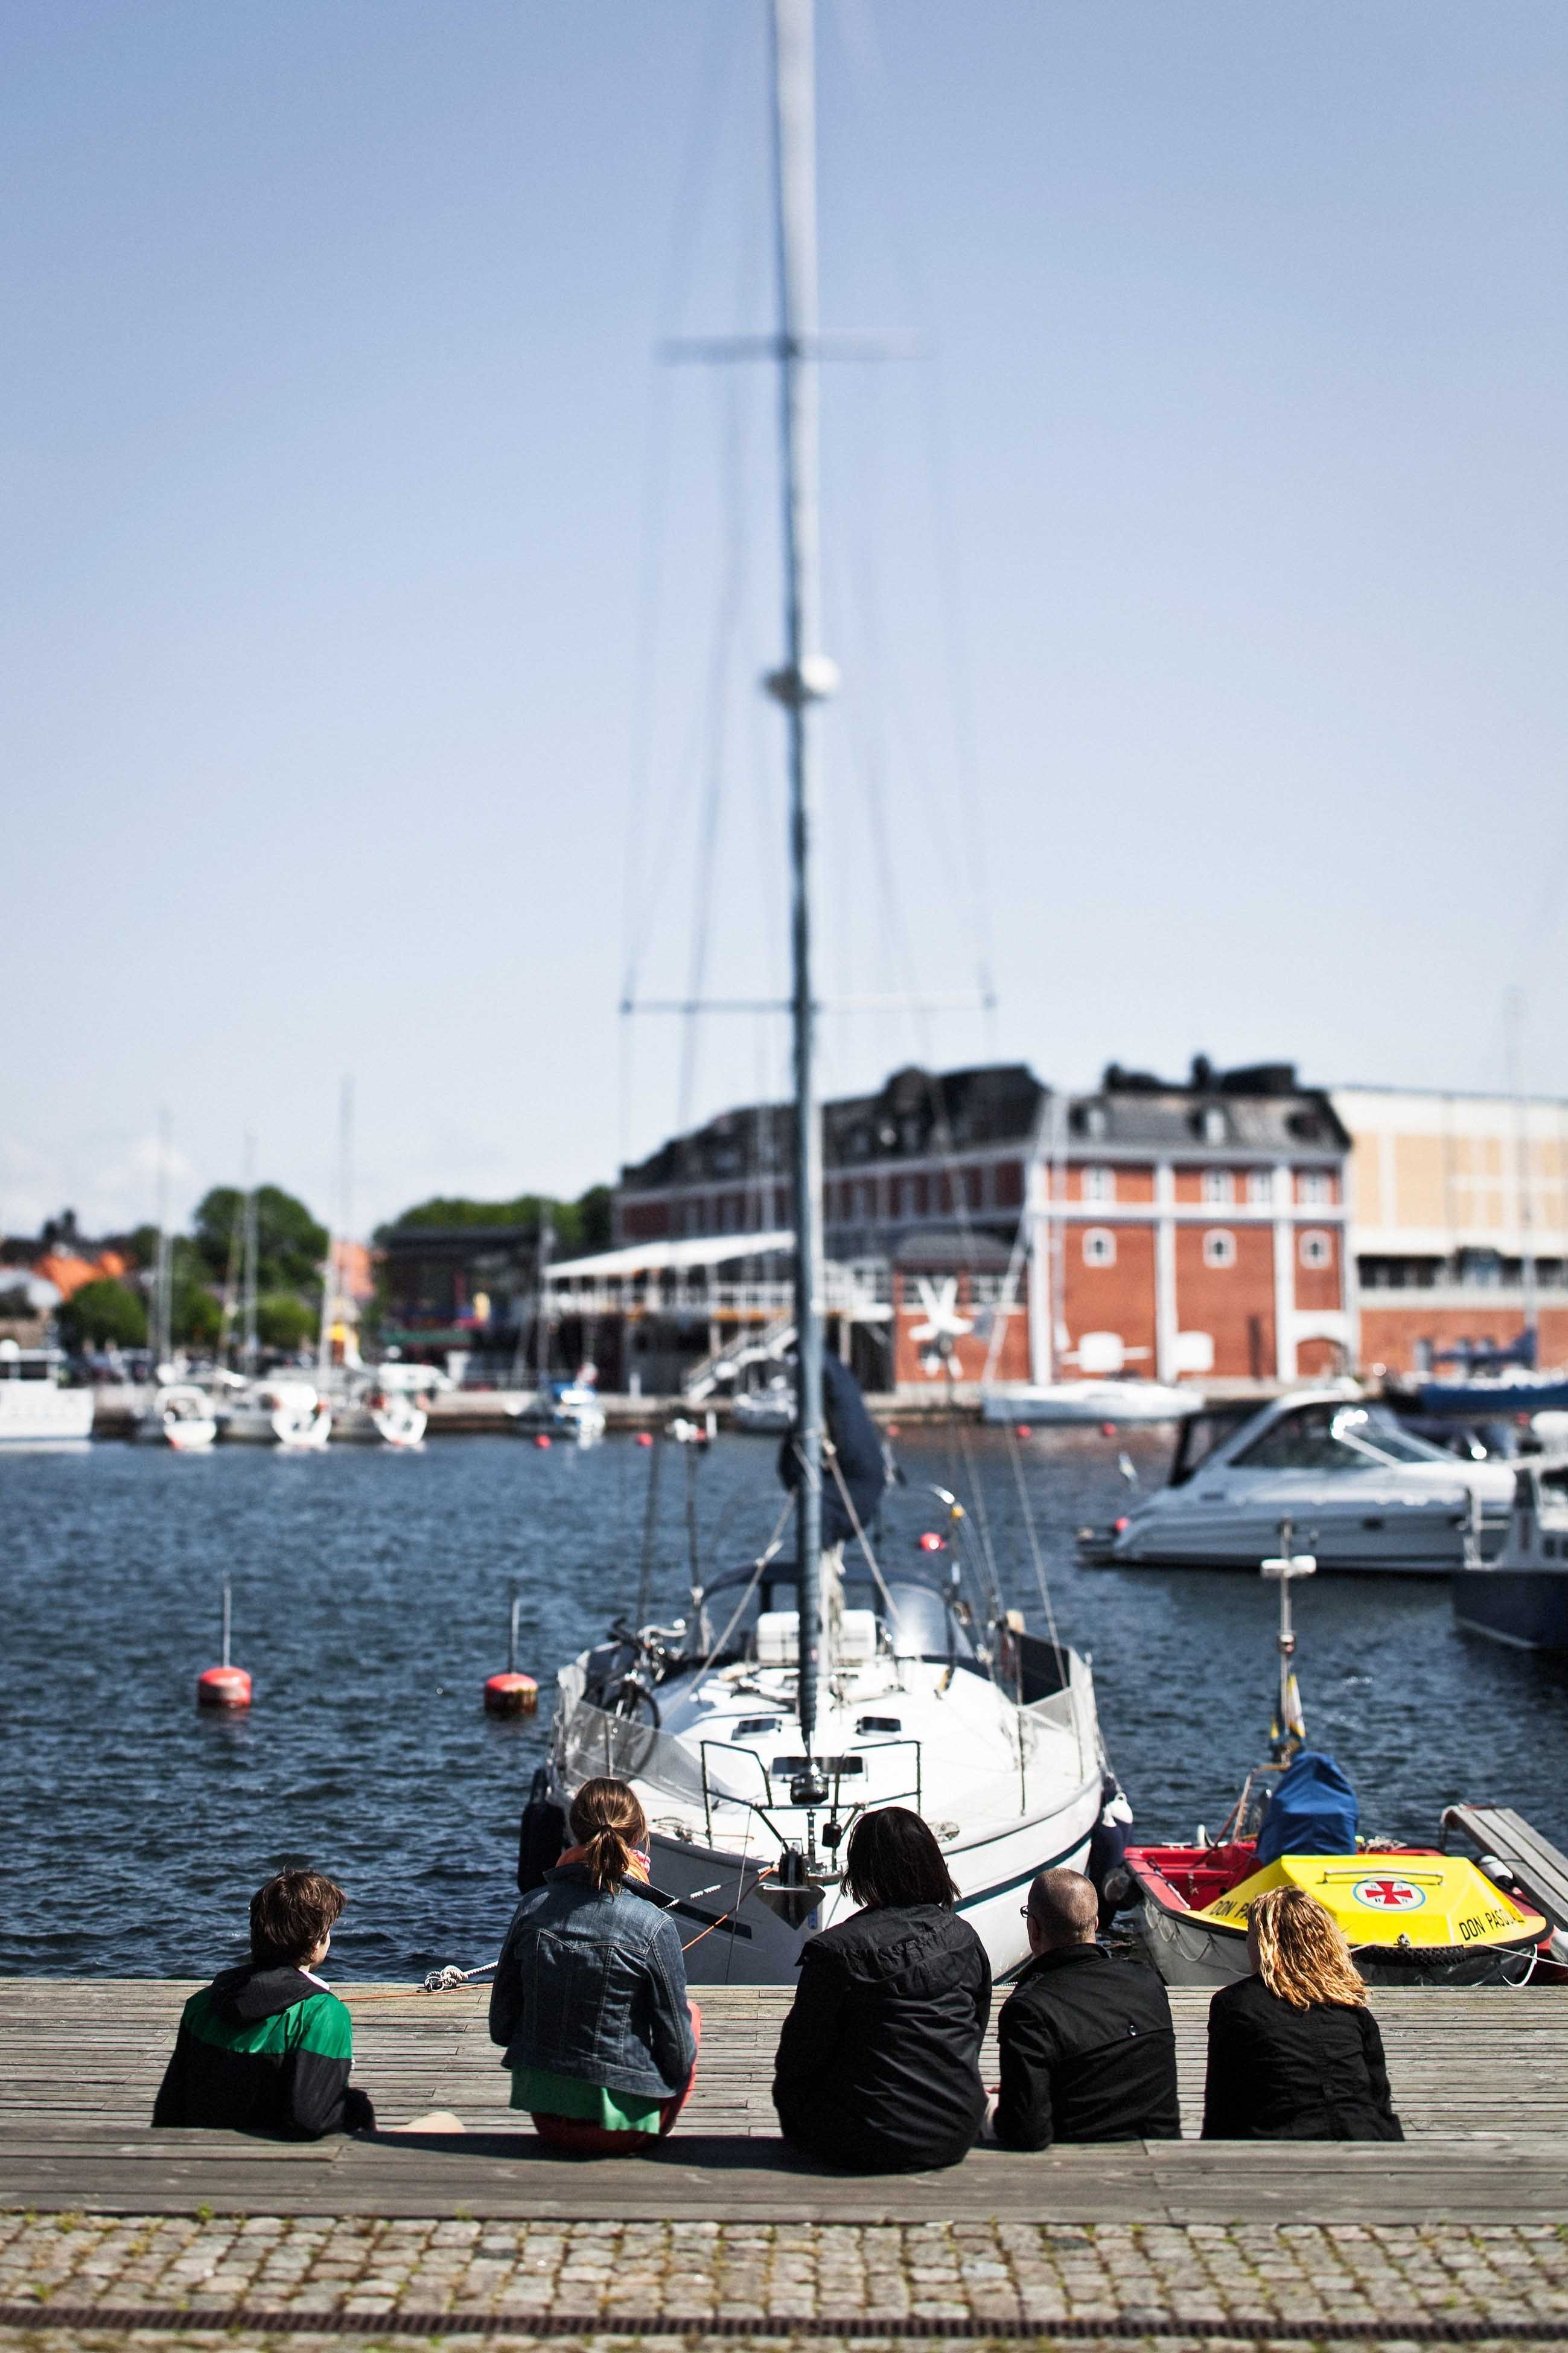 People sitting on the dock with a sailboat in front of them in Växjö, Sweden.